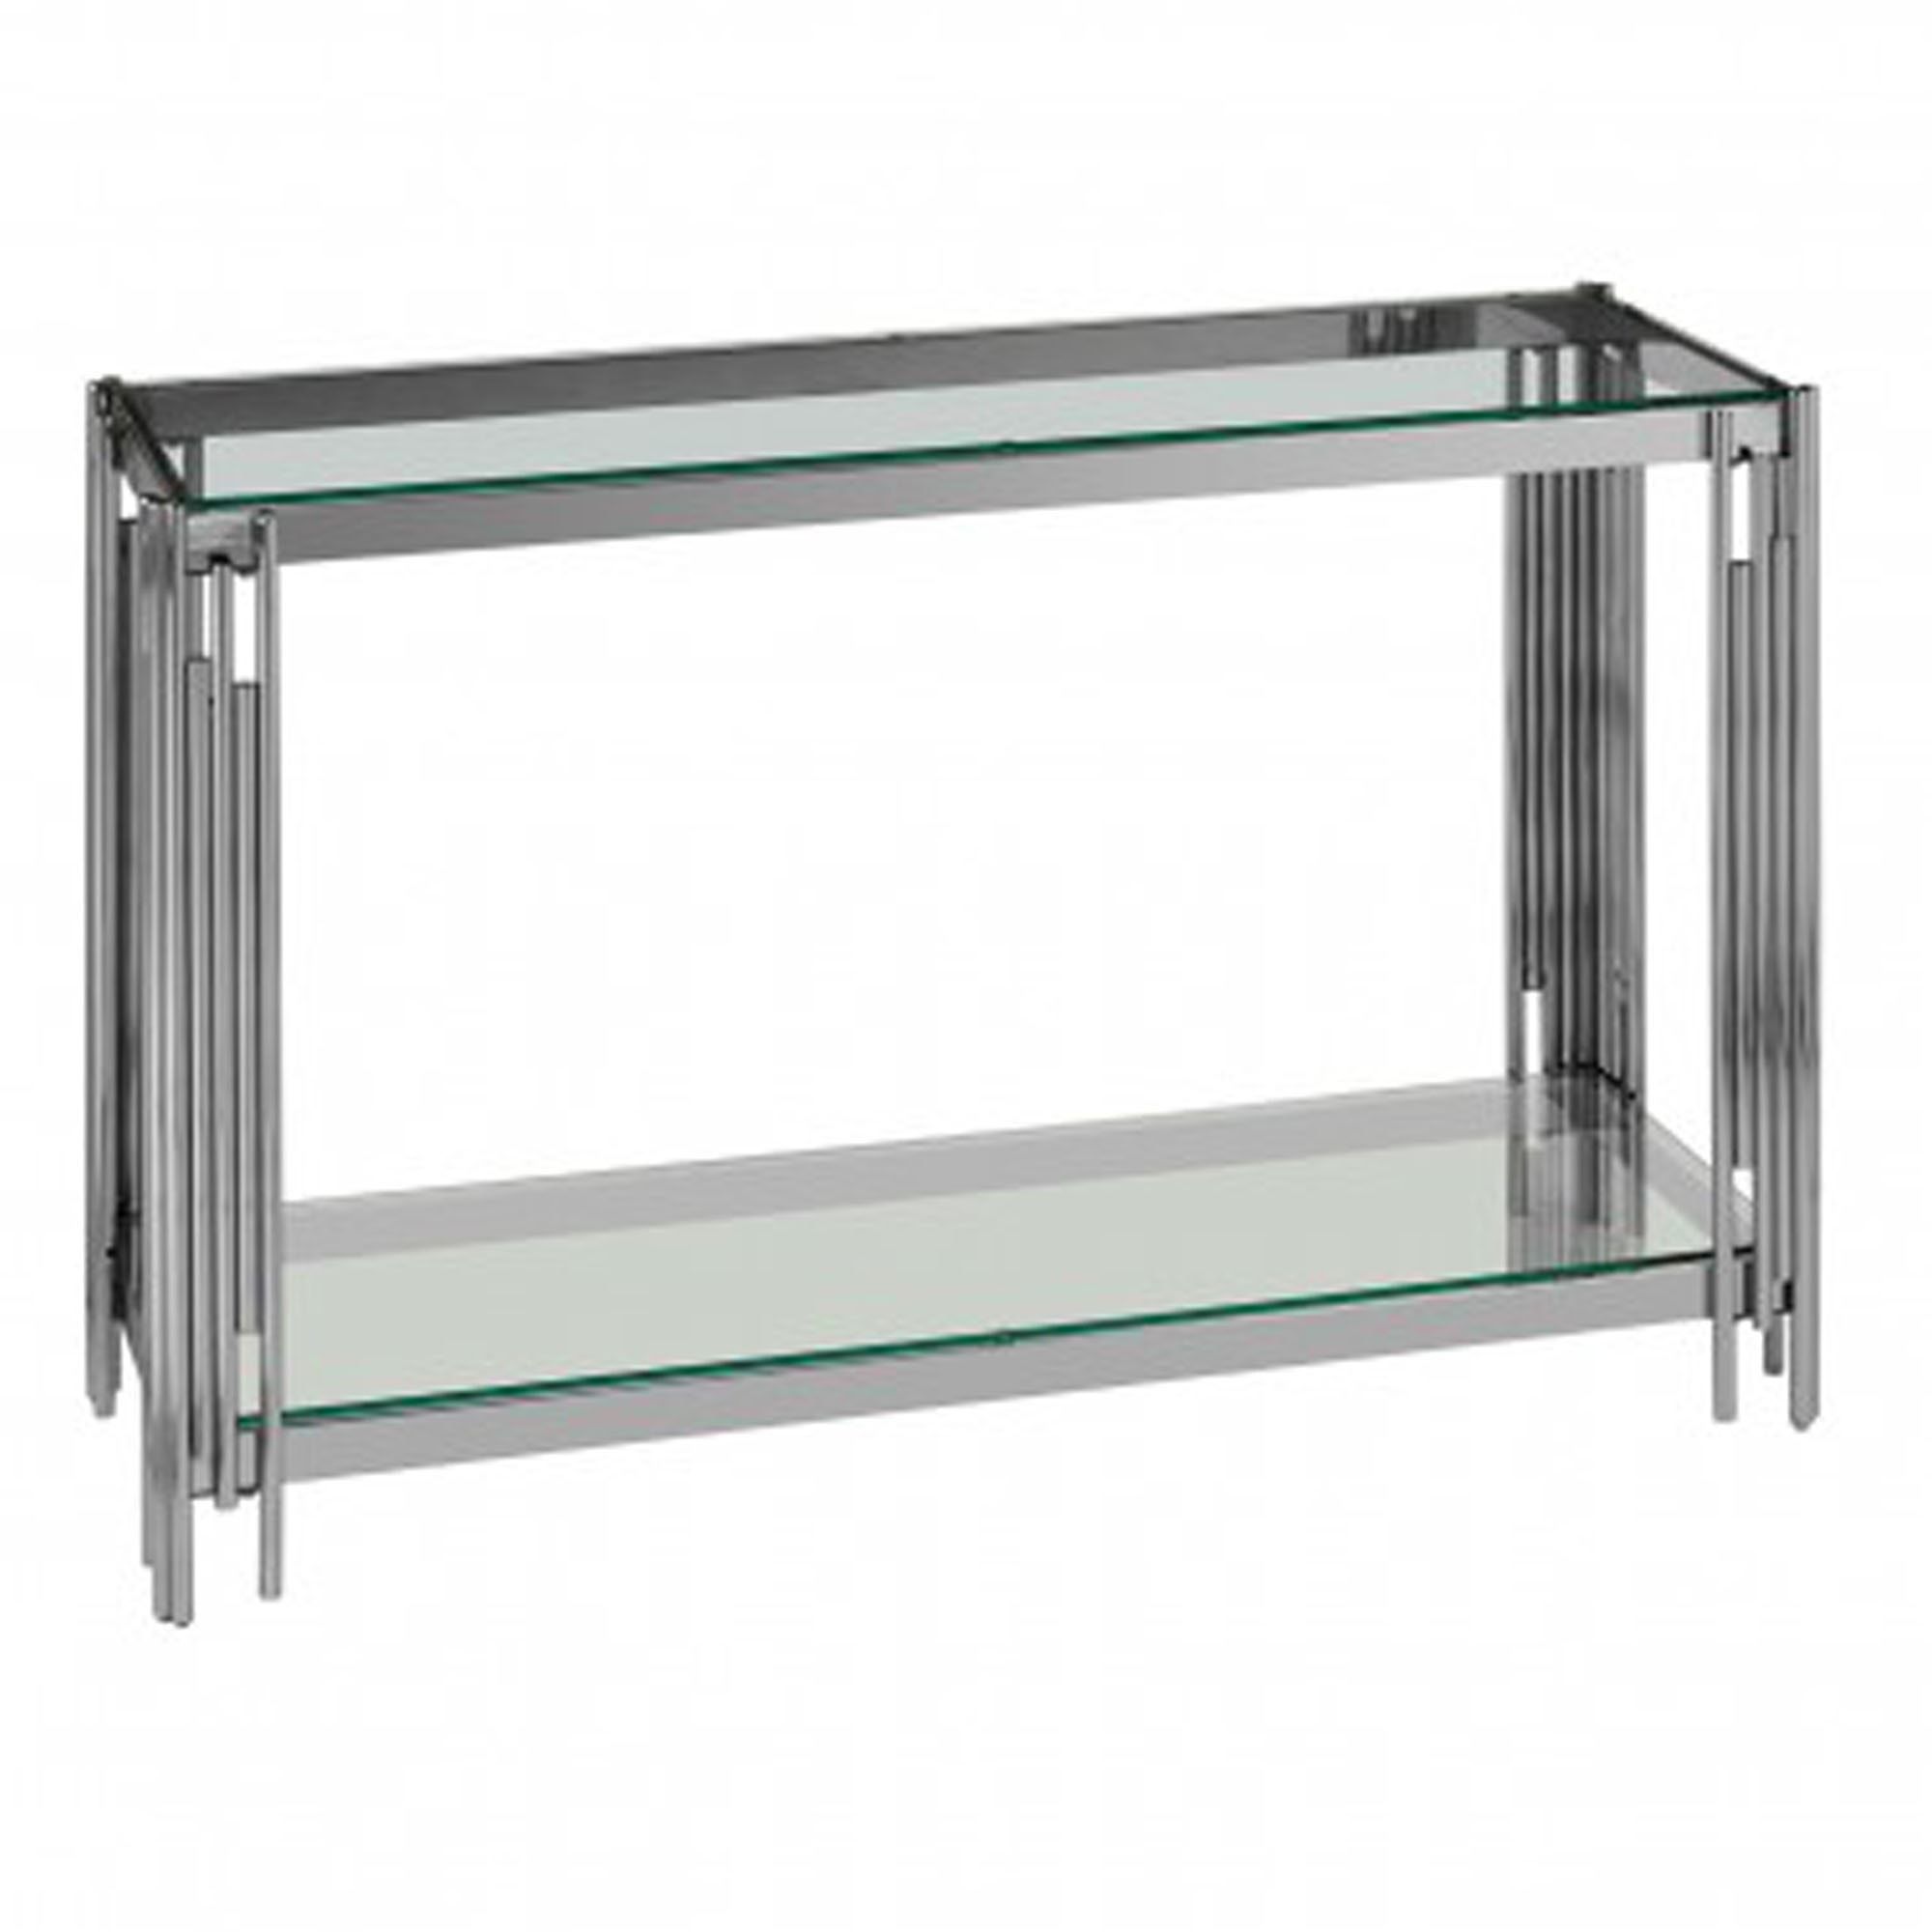 Alvaro Stainless Steel Console Table | Modern Console Tables For Stainless Steel Console Tables (View 7 of 20)